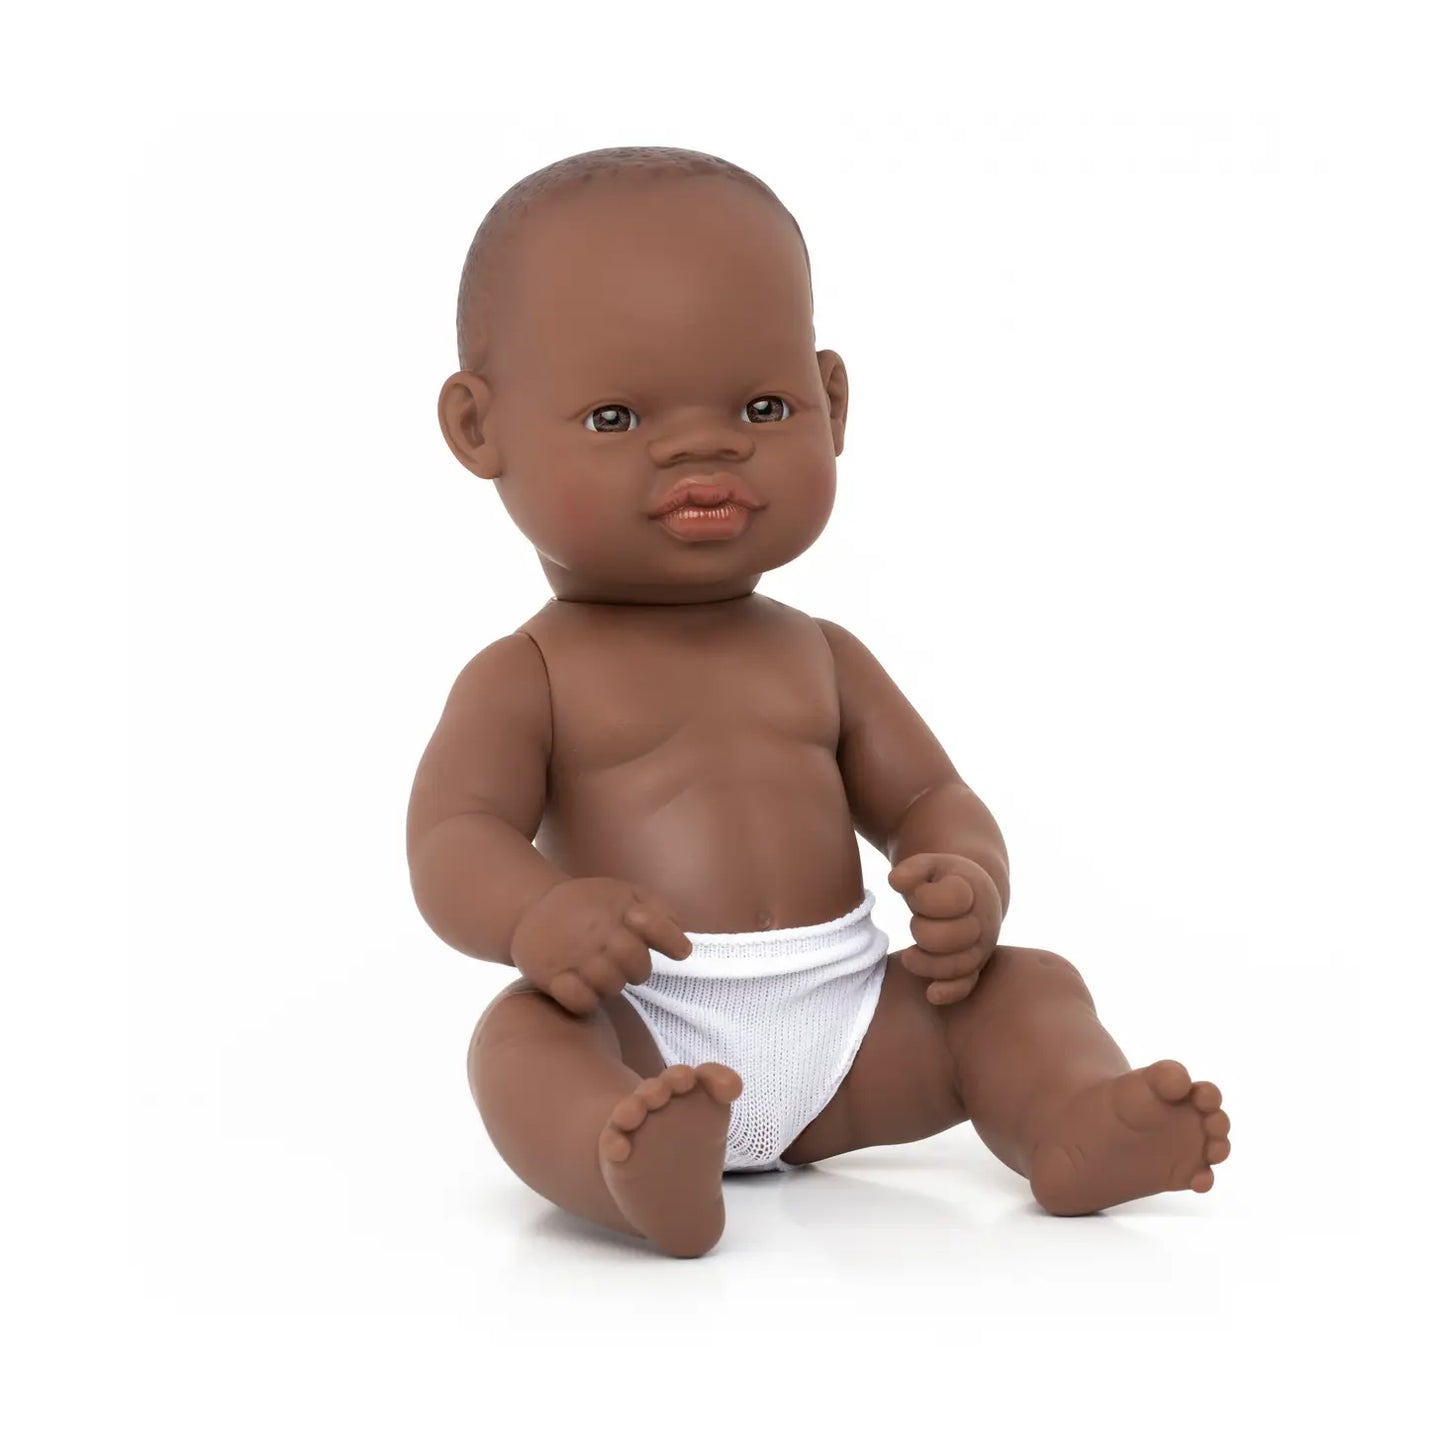 Miniland Male African Doll